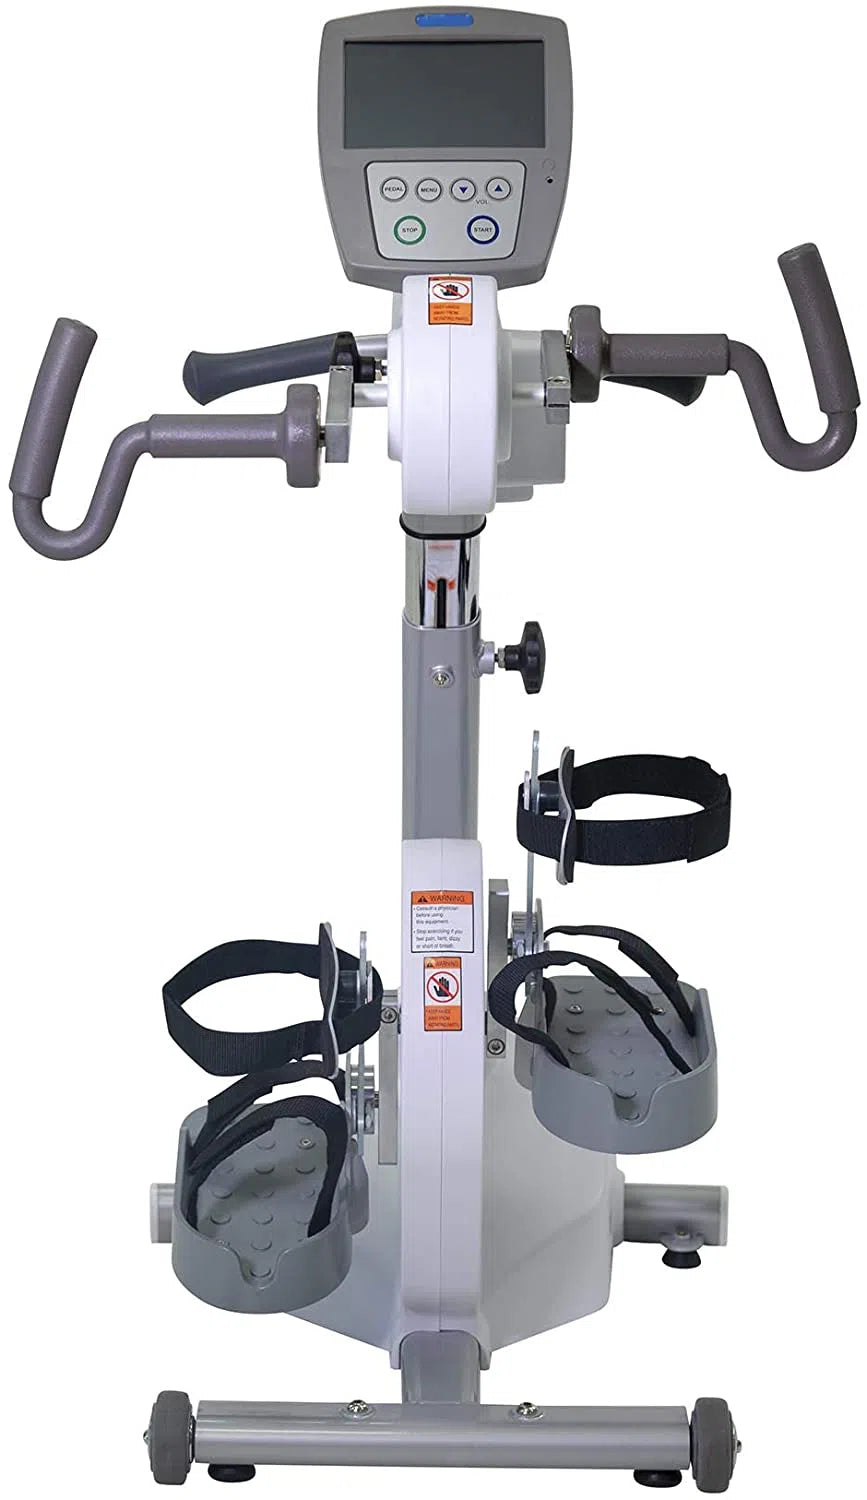 HCI OmniTrainer Physical Therapy Hand Bike OT-1100 from the front angle